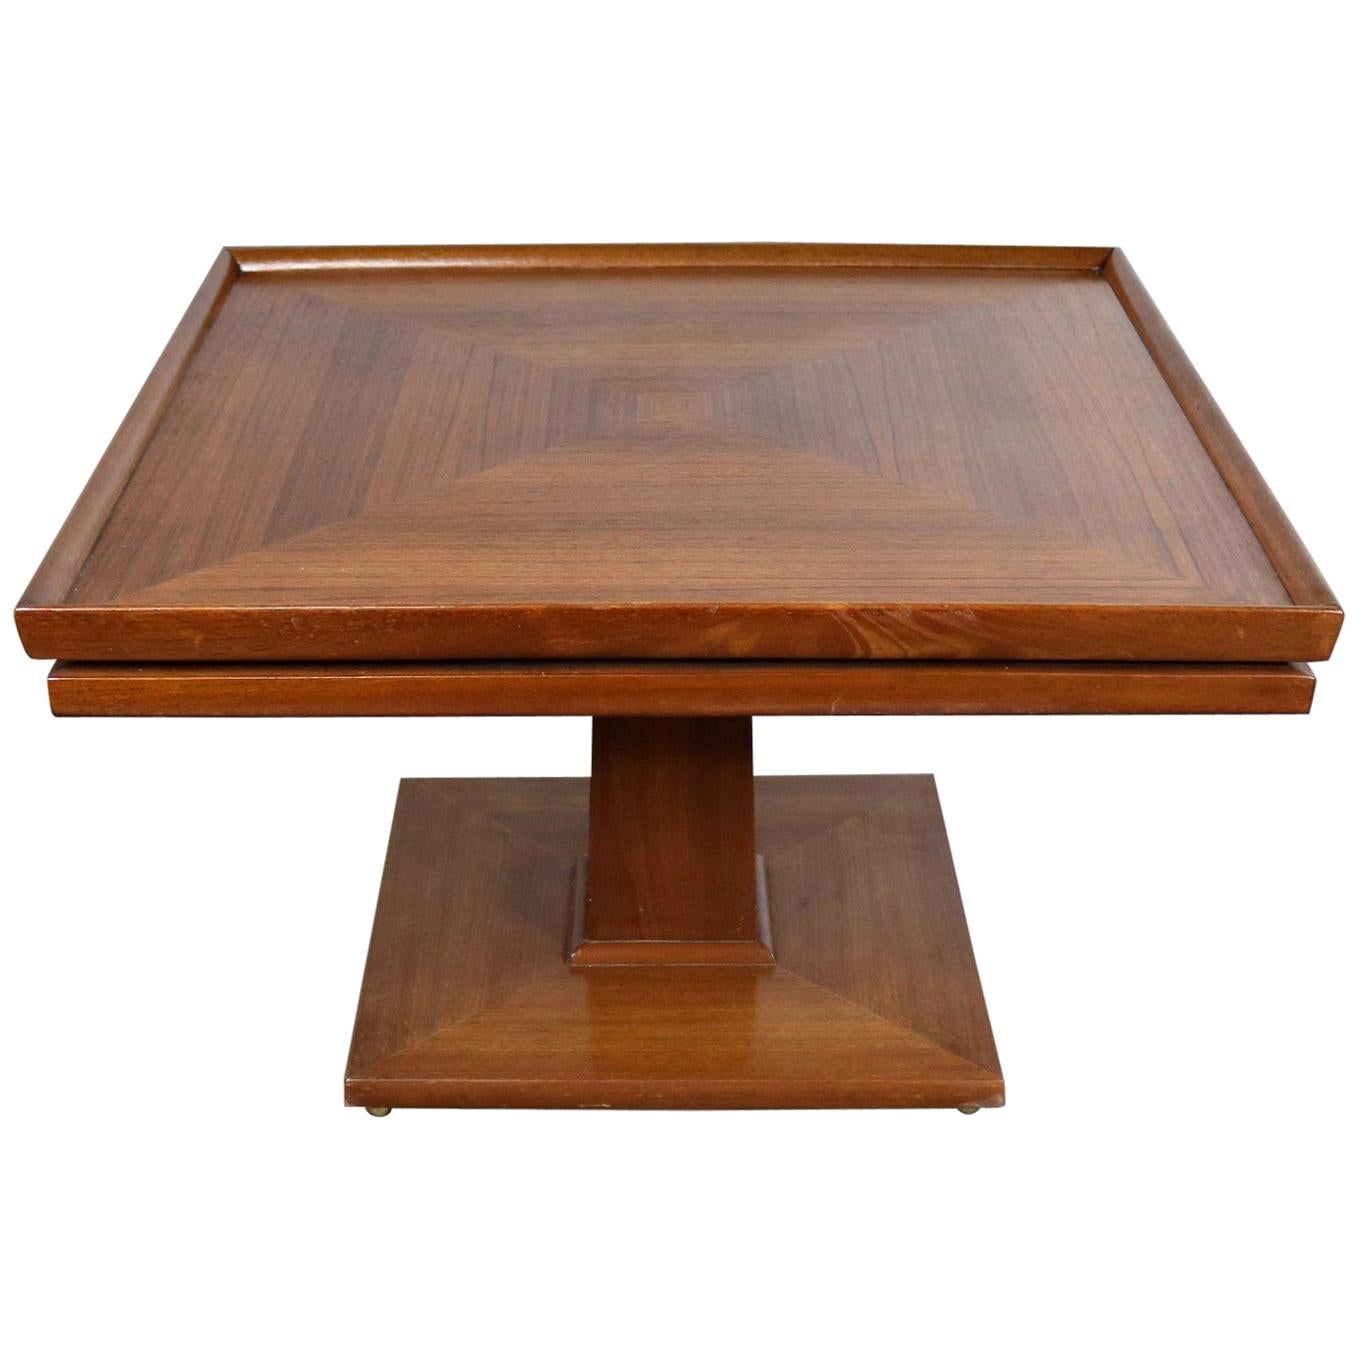 Erwin Lambeth Midcentury Walnut Square Pedestal Side End or Lamp Table